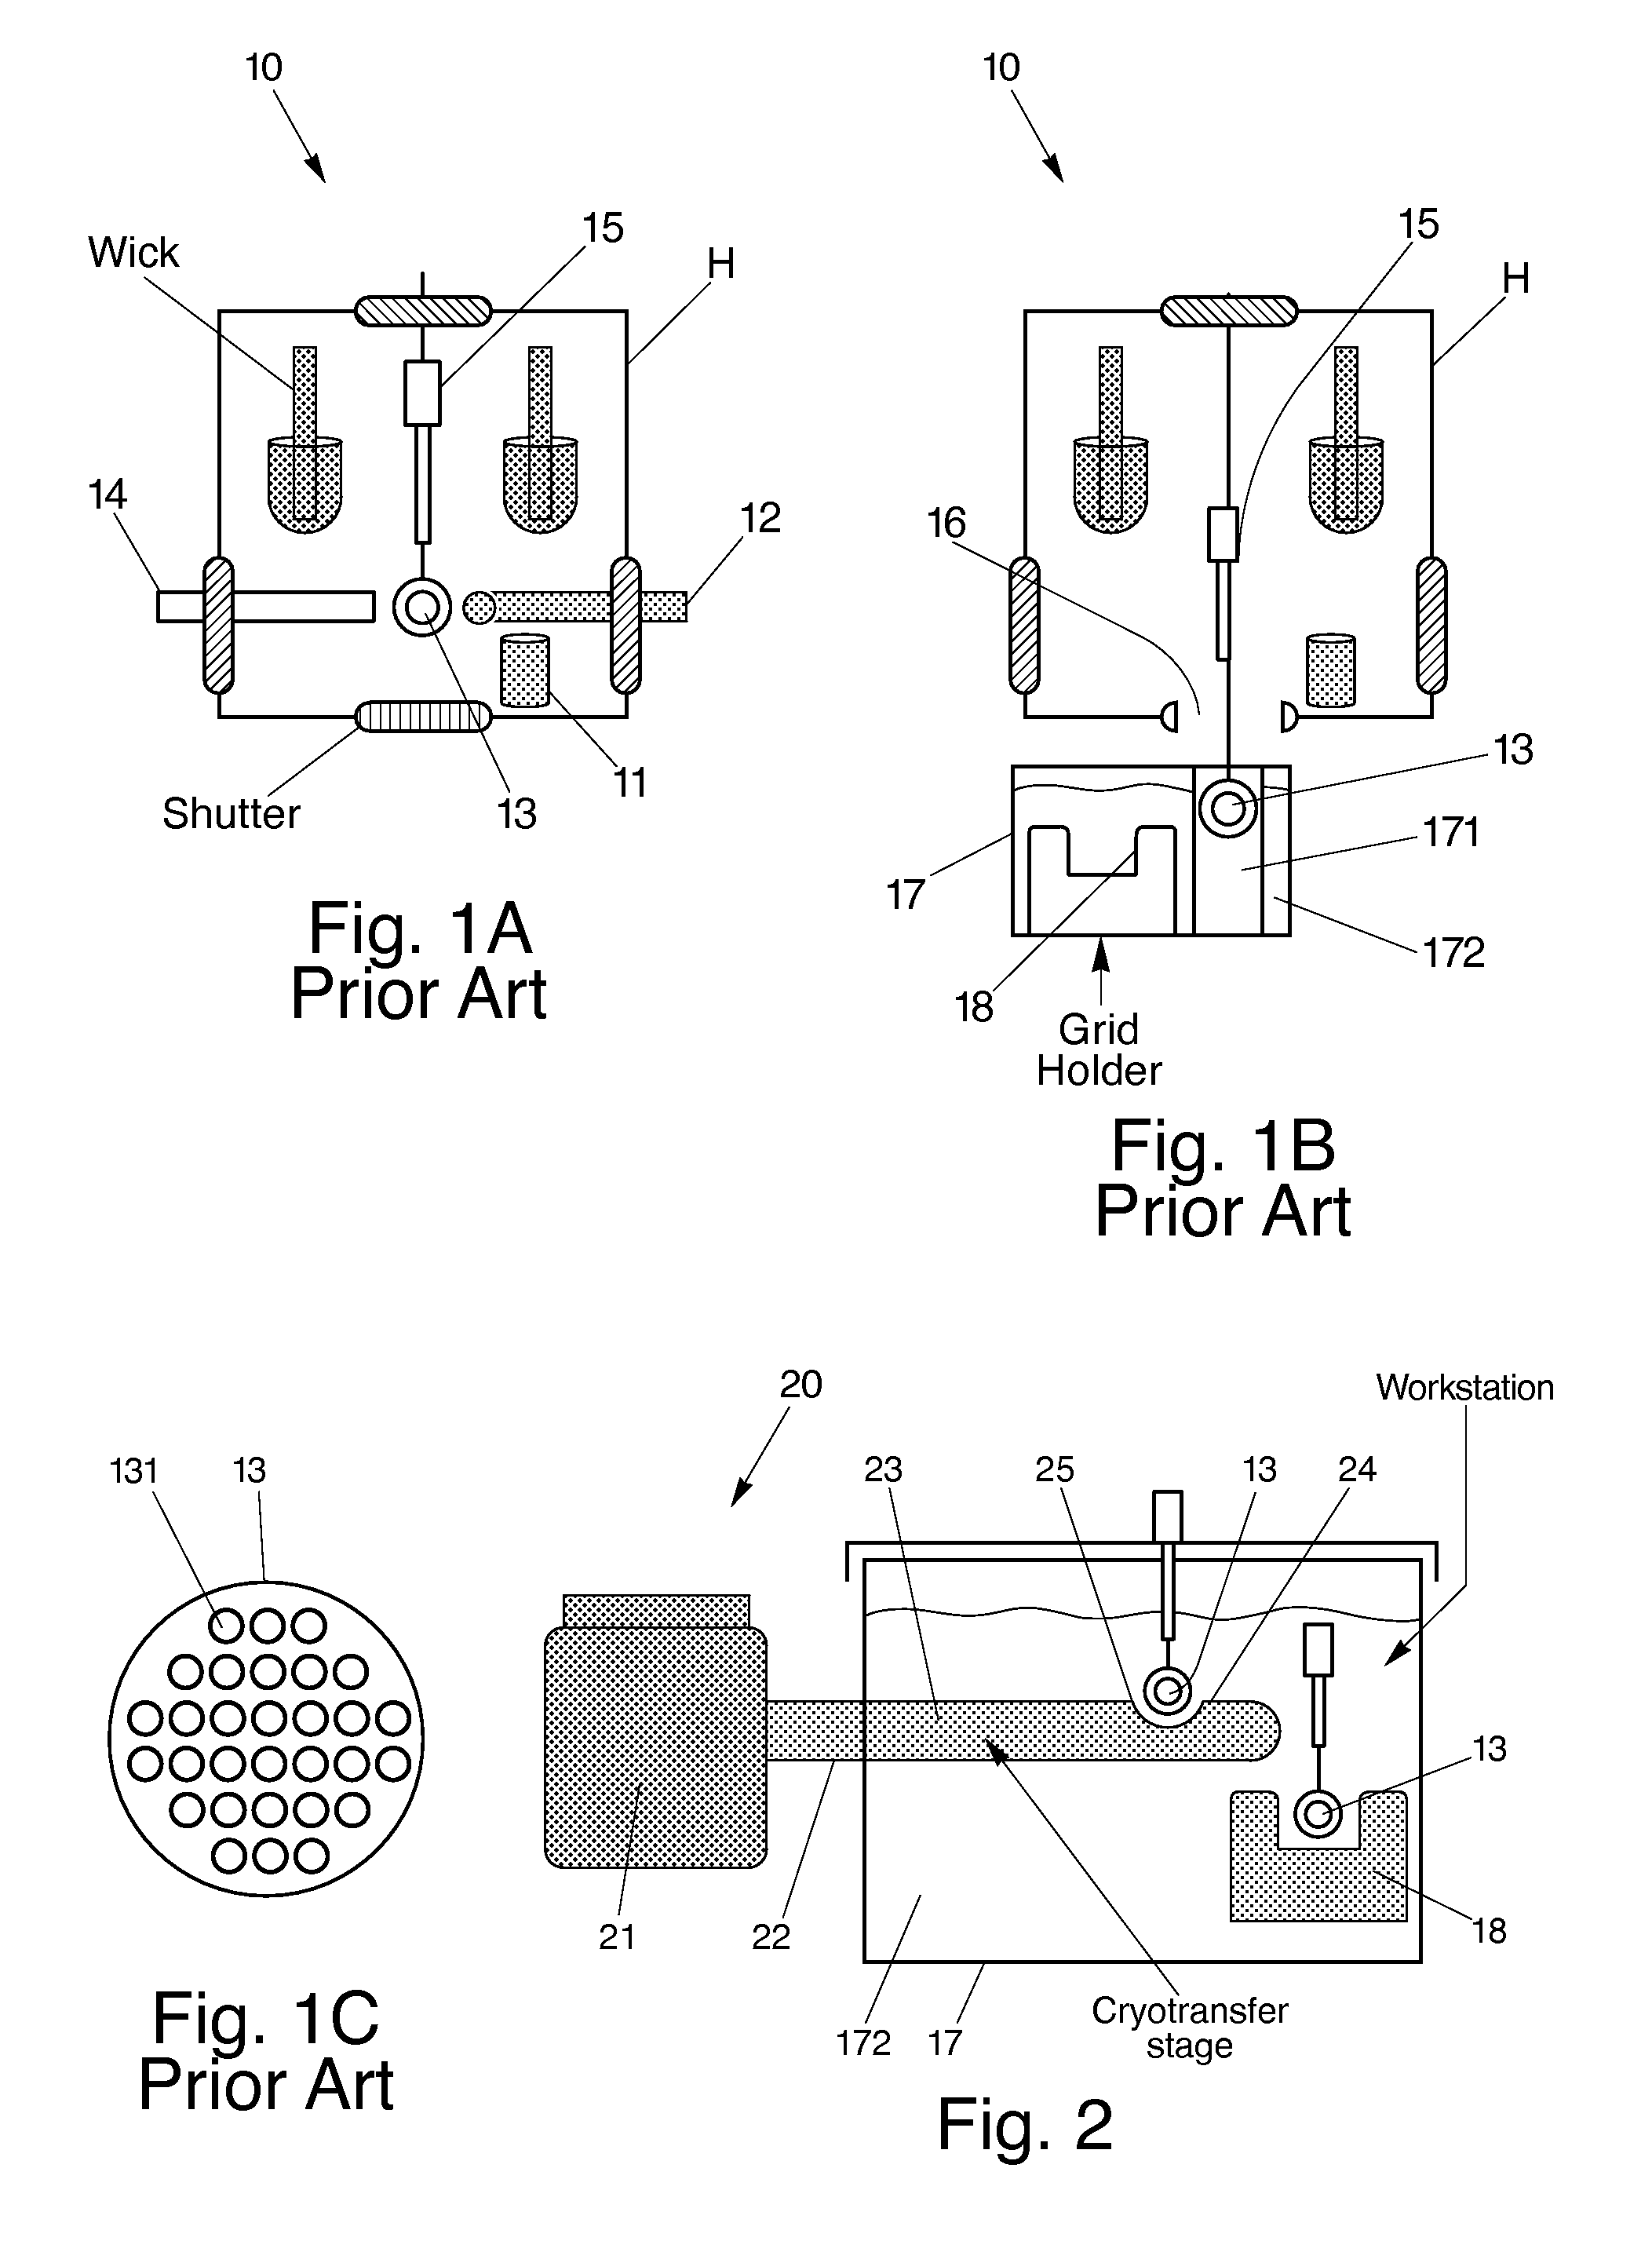 Systems and methods of identifying biomarkers for subsequent screening and monitoring of diseases